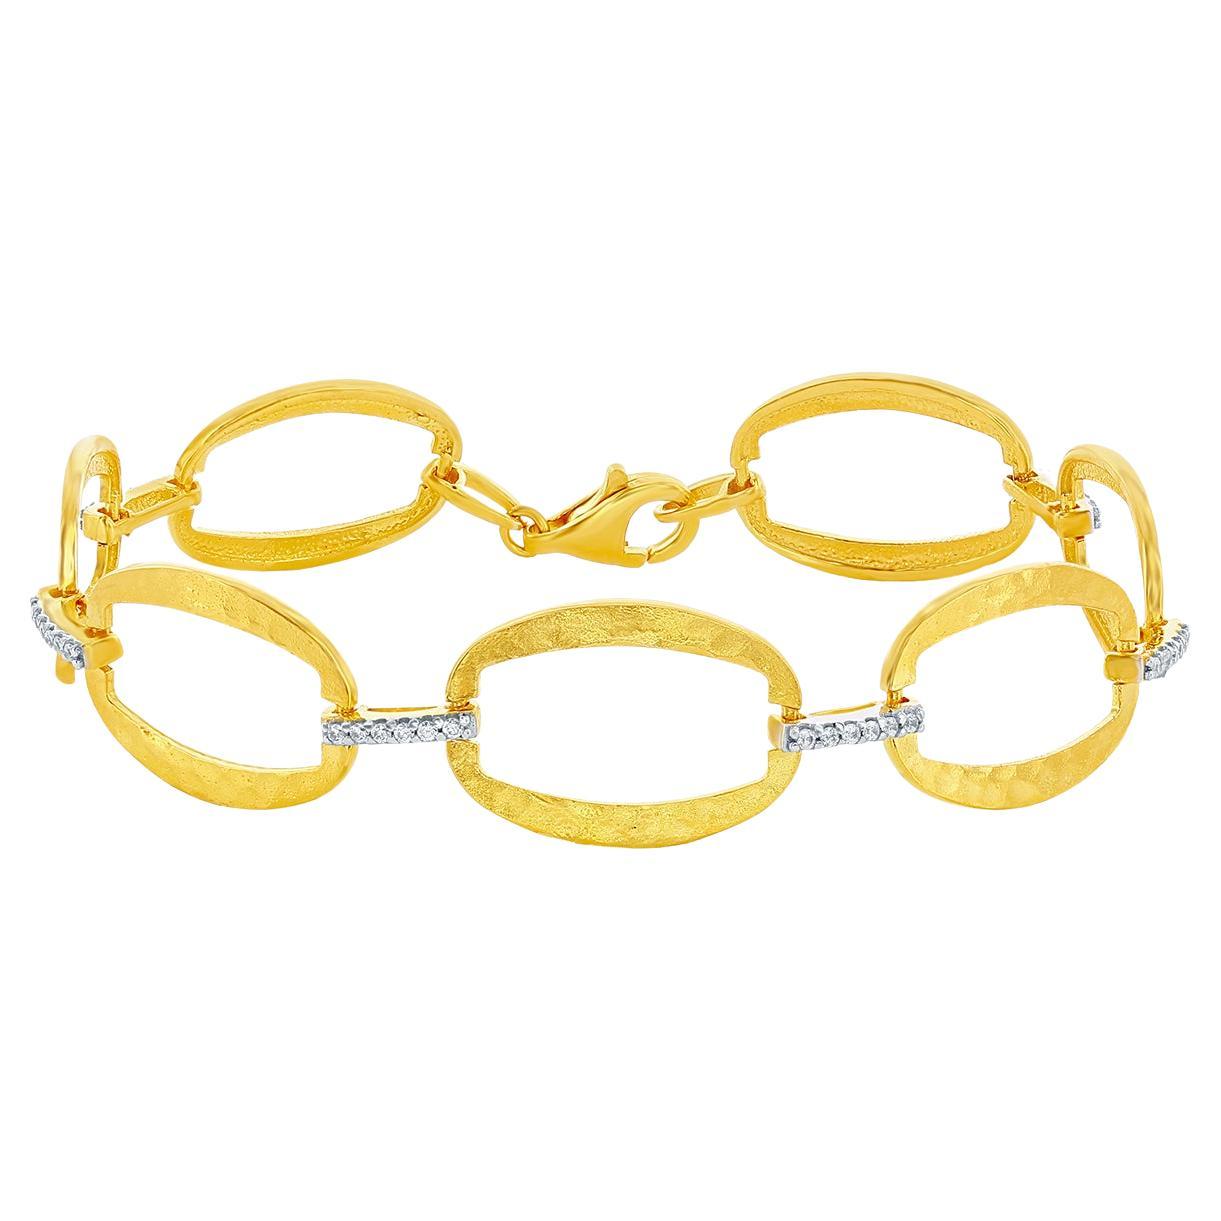 Craftted 14K Yellow Gold Open Link Bracelet